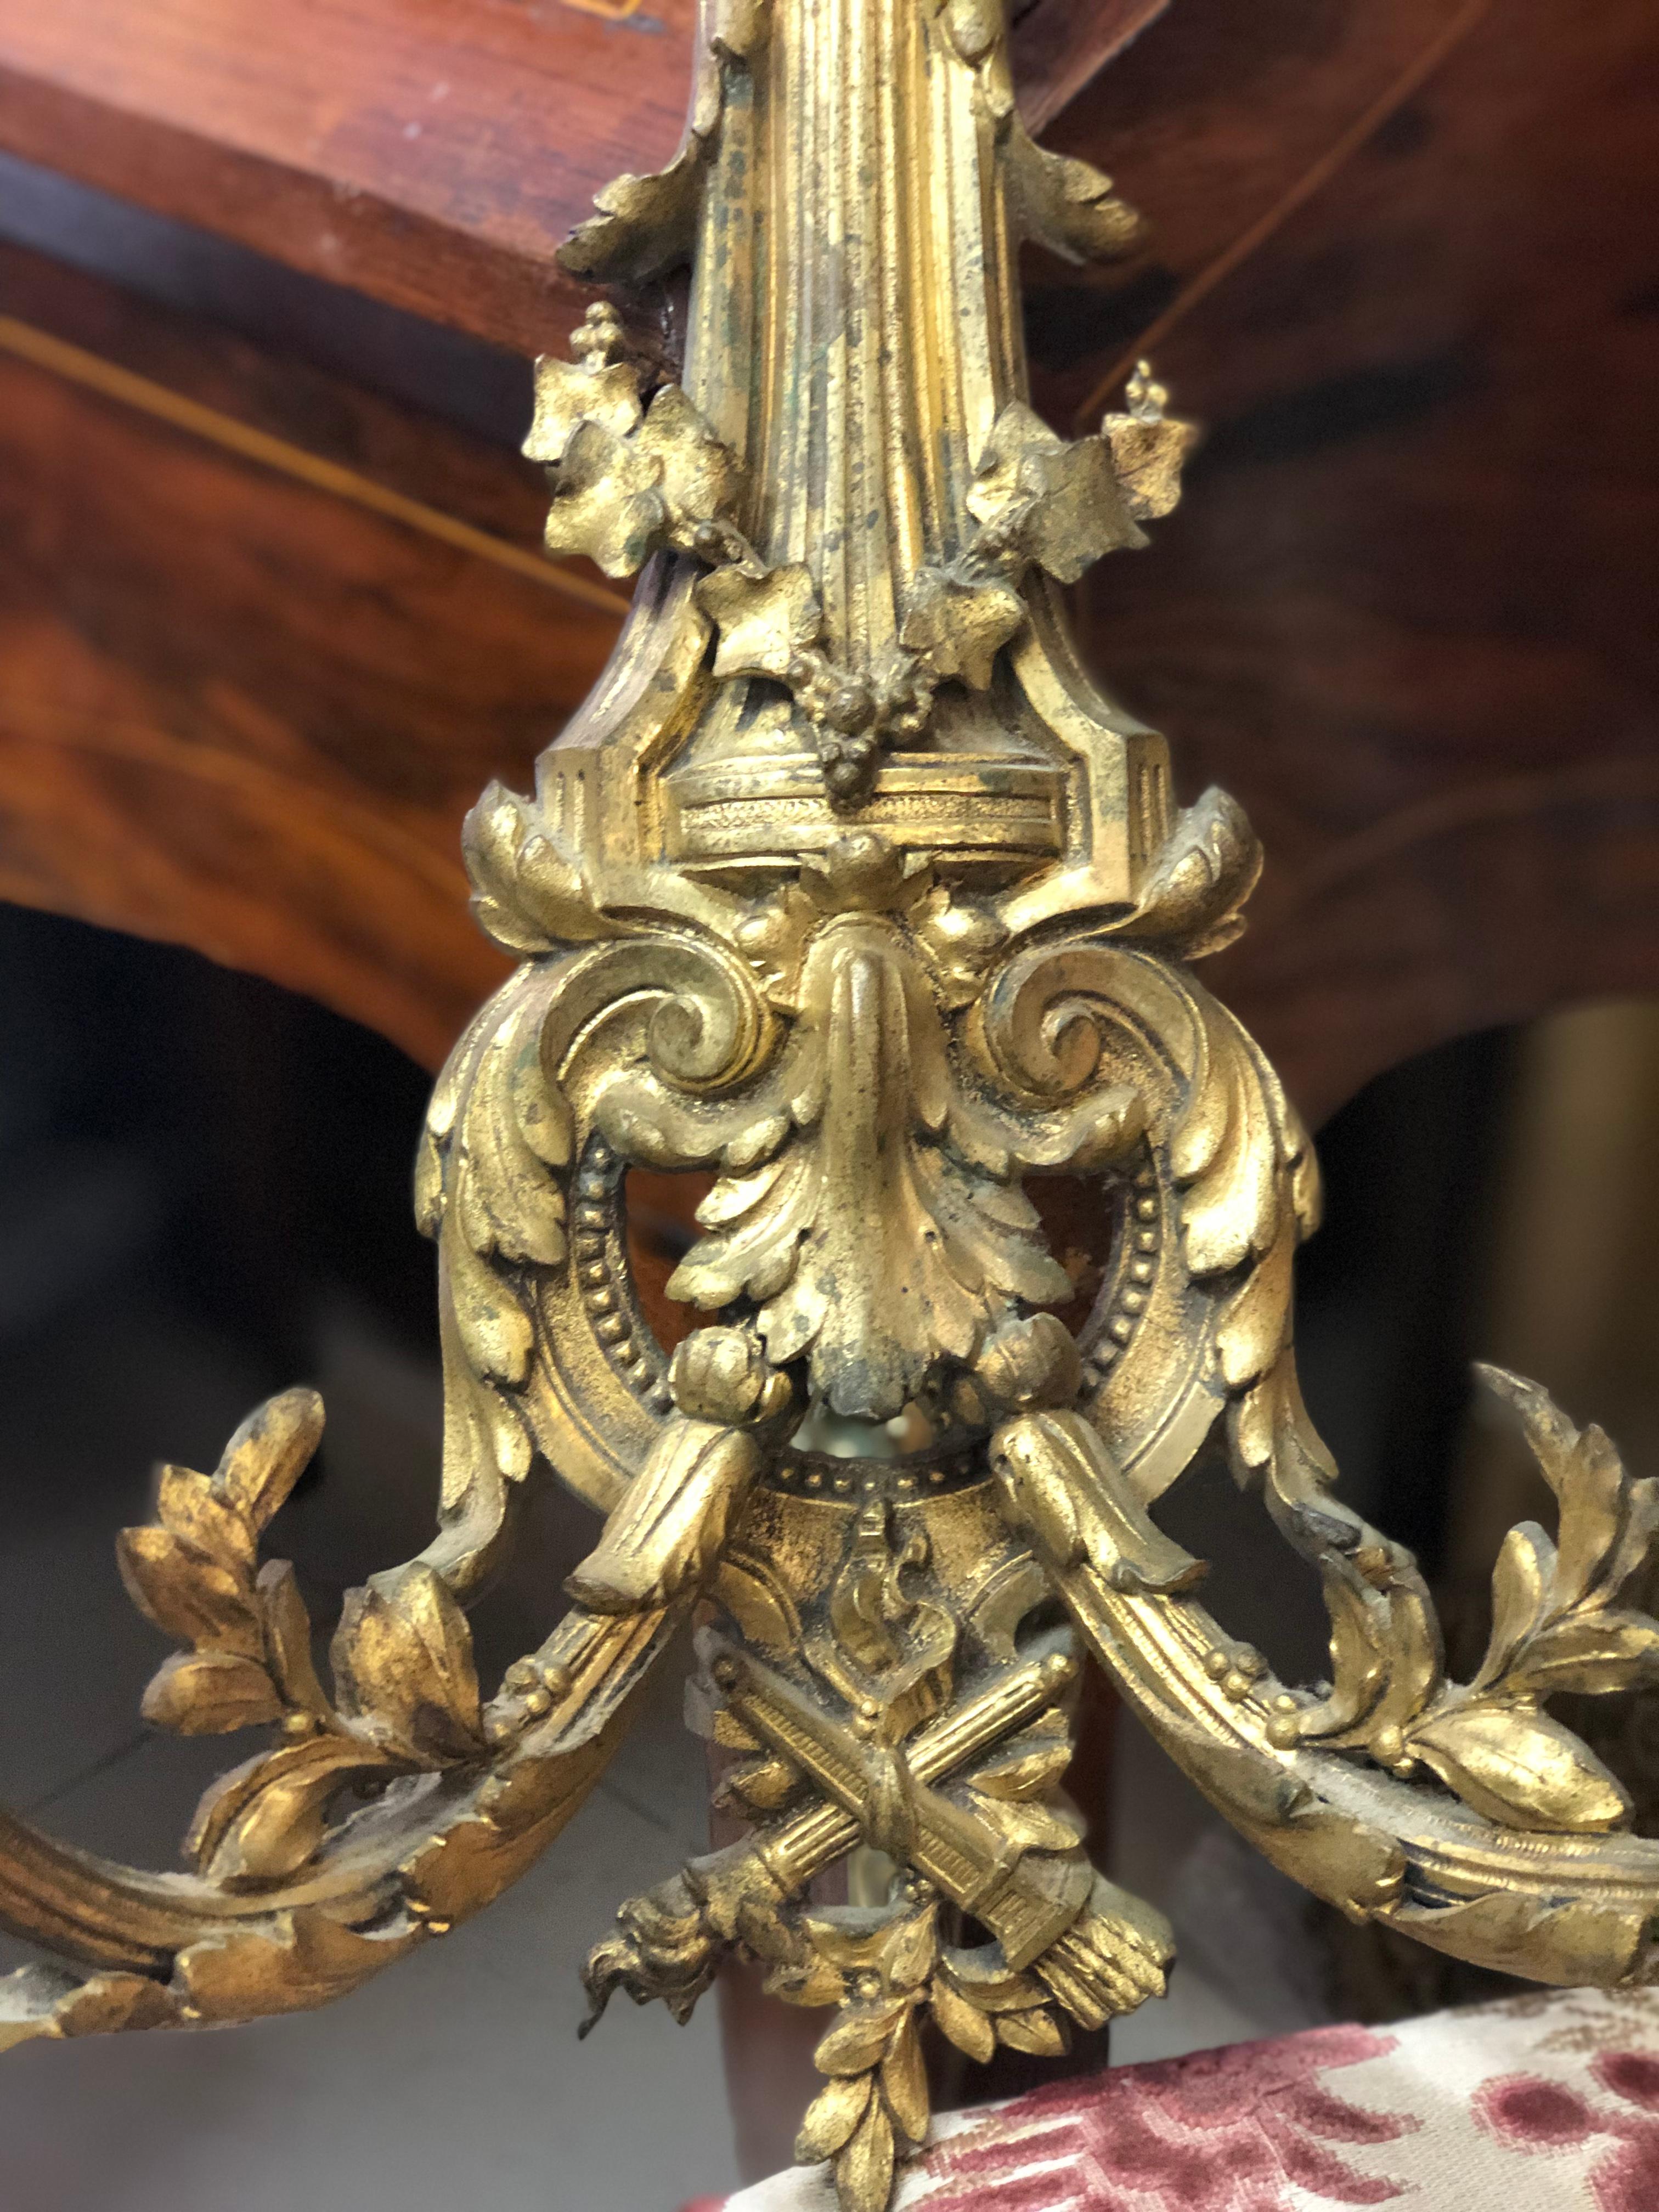 Pair of bronze gilded sconces with two arms each one having different crystal flowers as shades. Made in late 19th century they are both in very good original condition.
